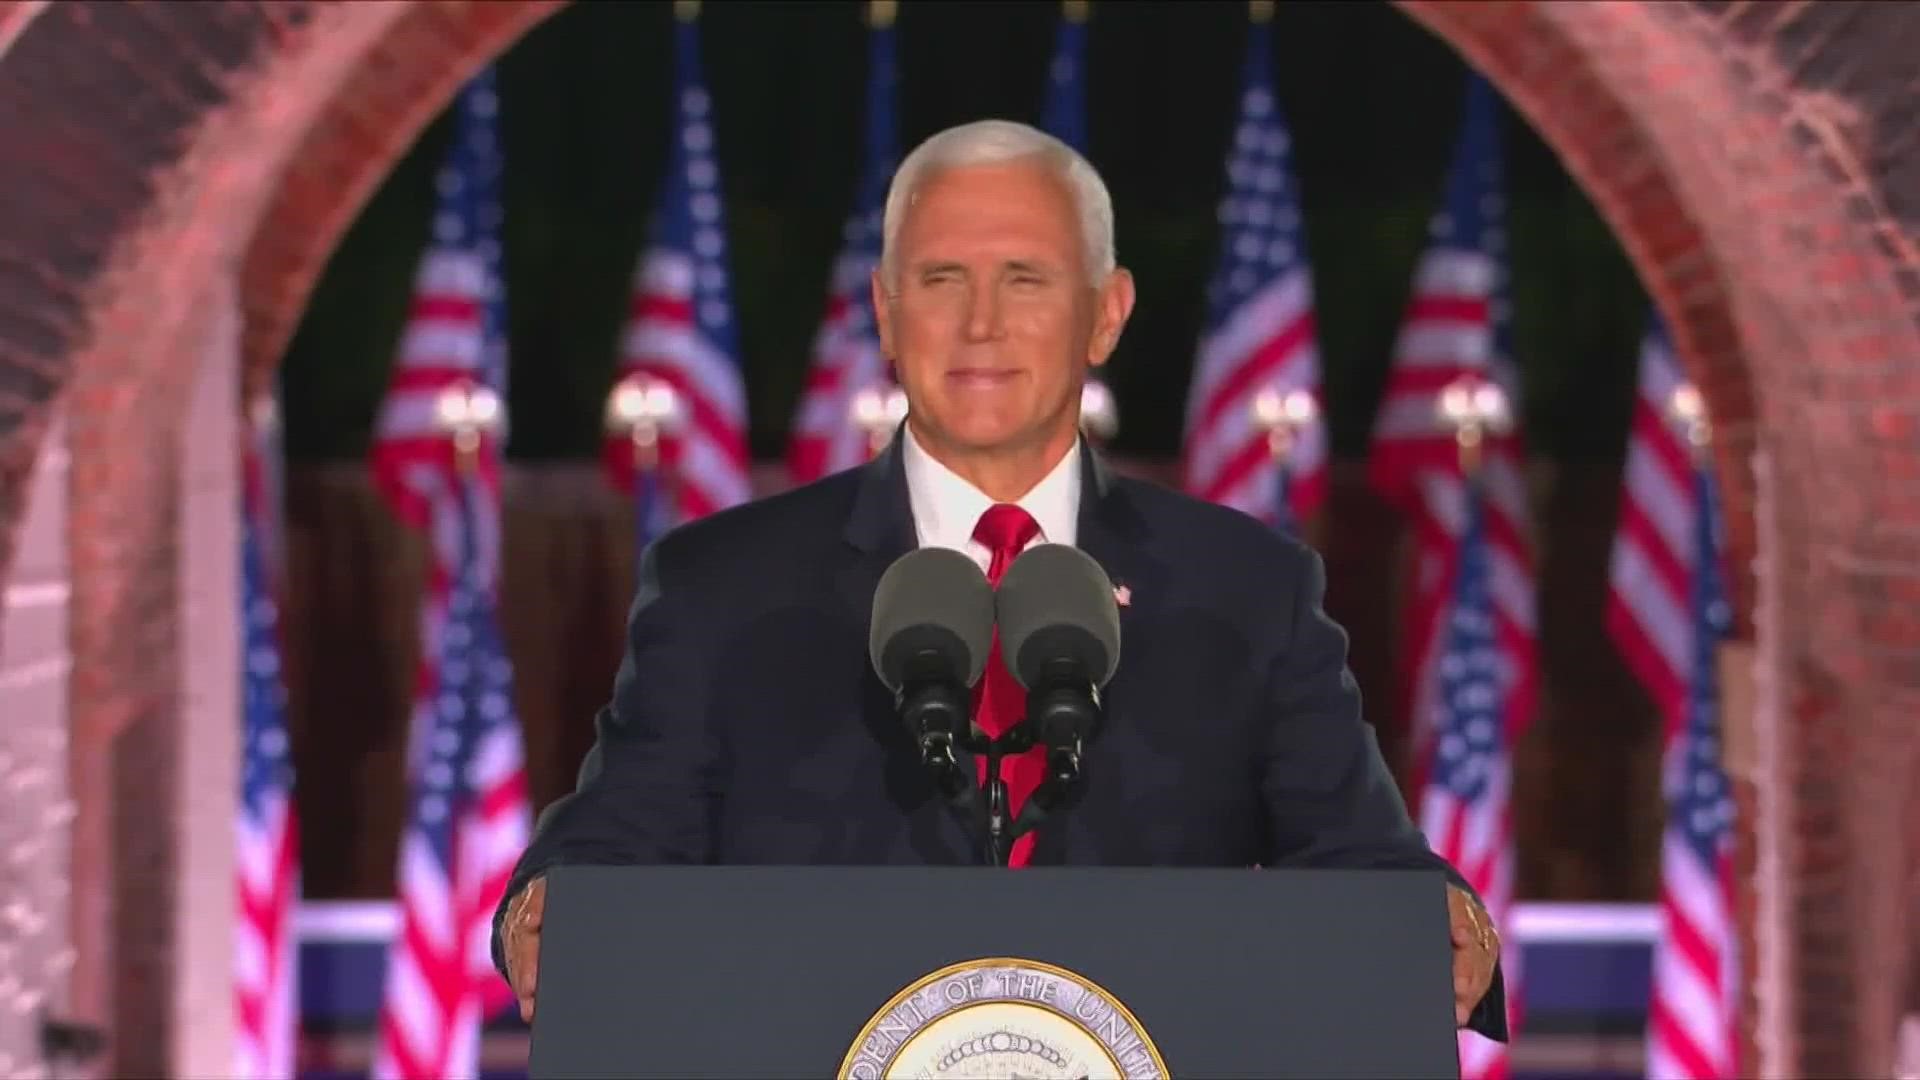 Vice President Mike Pence delivered his Republican National Convention speech Wednesday night from Fort McHenry in Baltimore.